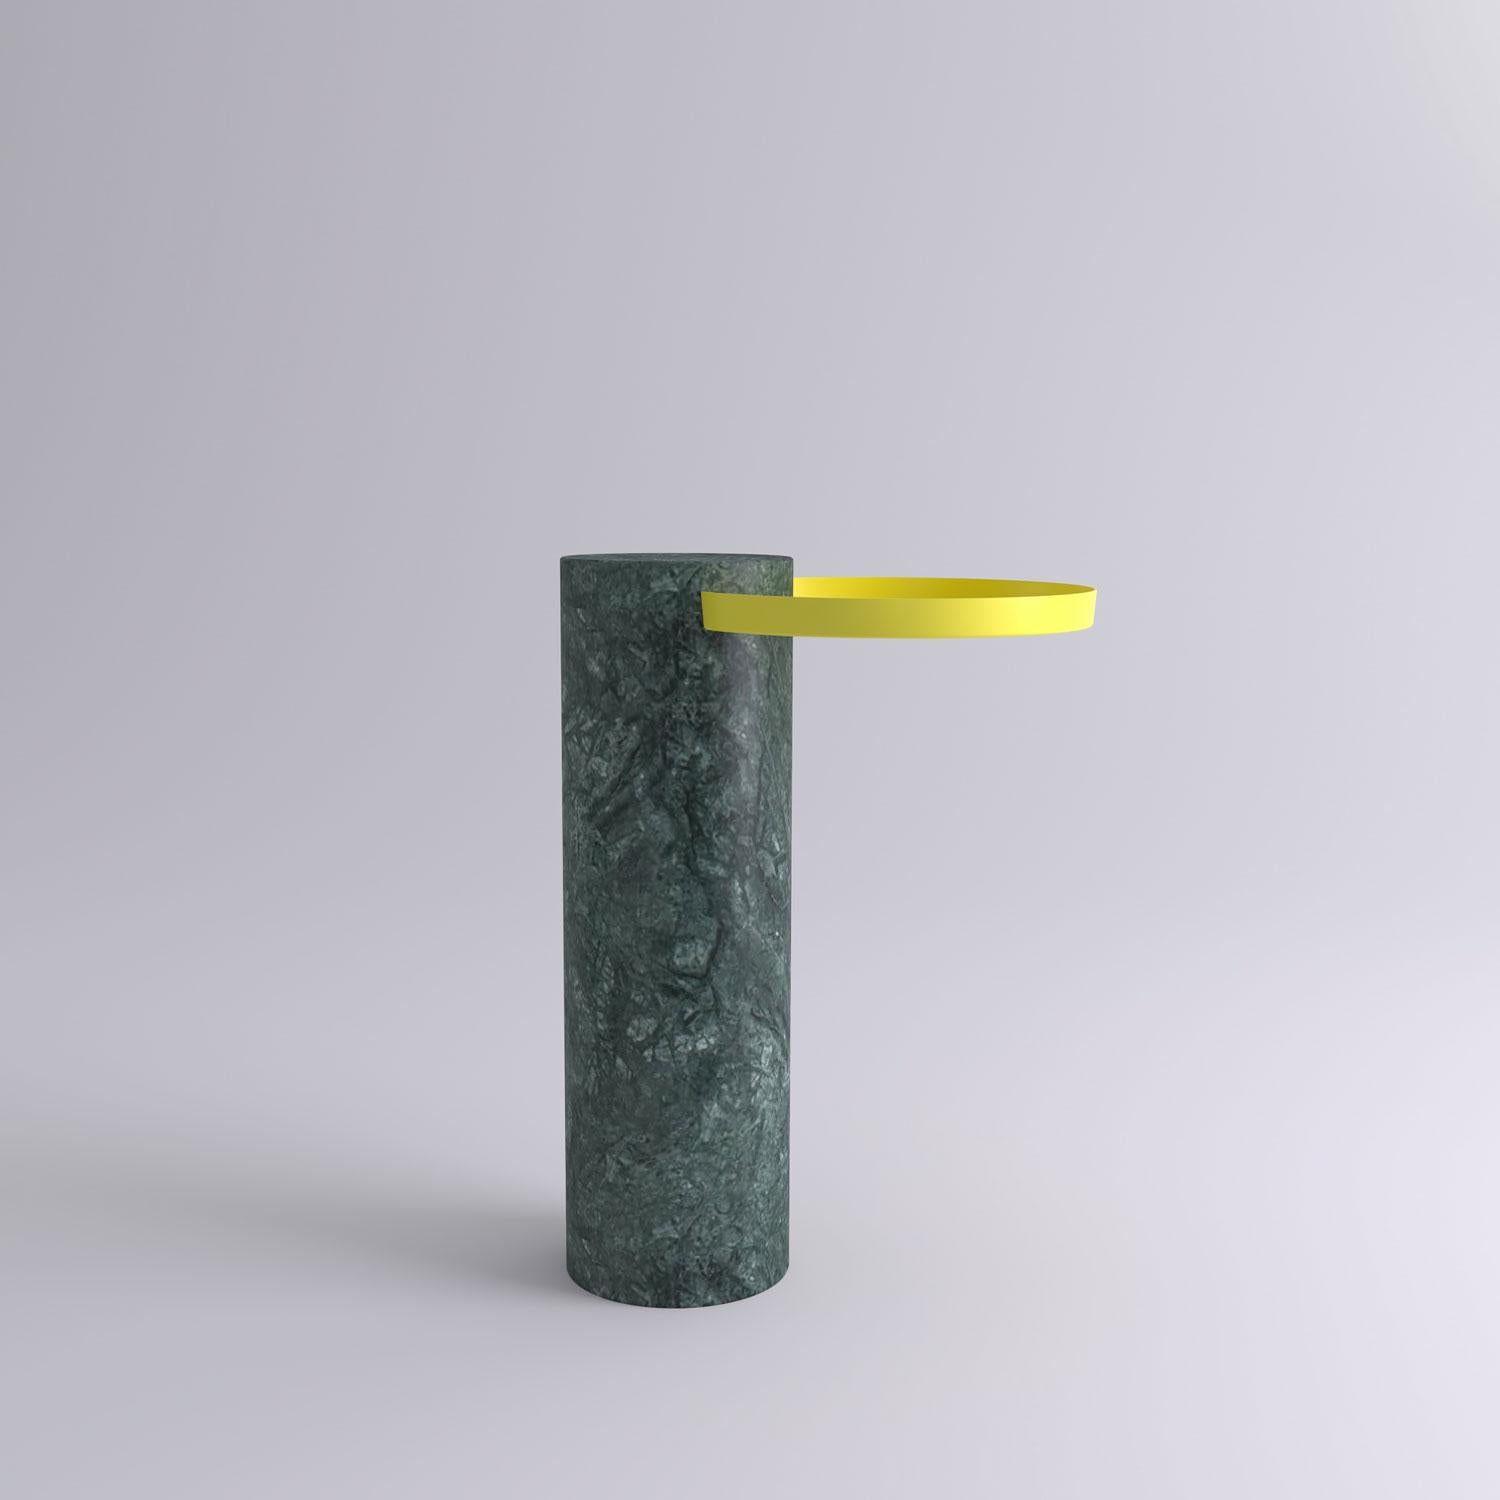 High indian green marble contemporary guéridon, Sebastian Herkner
Dimensions: D 42 x H 57 cm
Materials: Indian Green marble, yellow metal tray

The salute table exists in 3 sizes, 4 different marble stones for the column and 5 different finishes